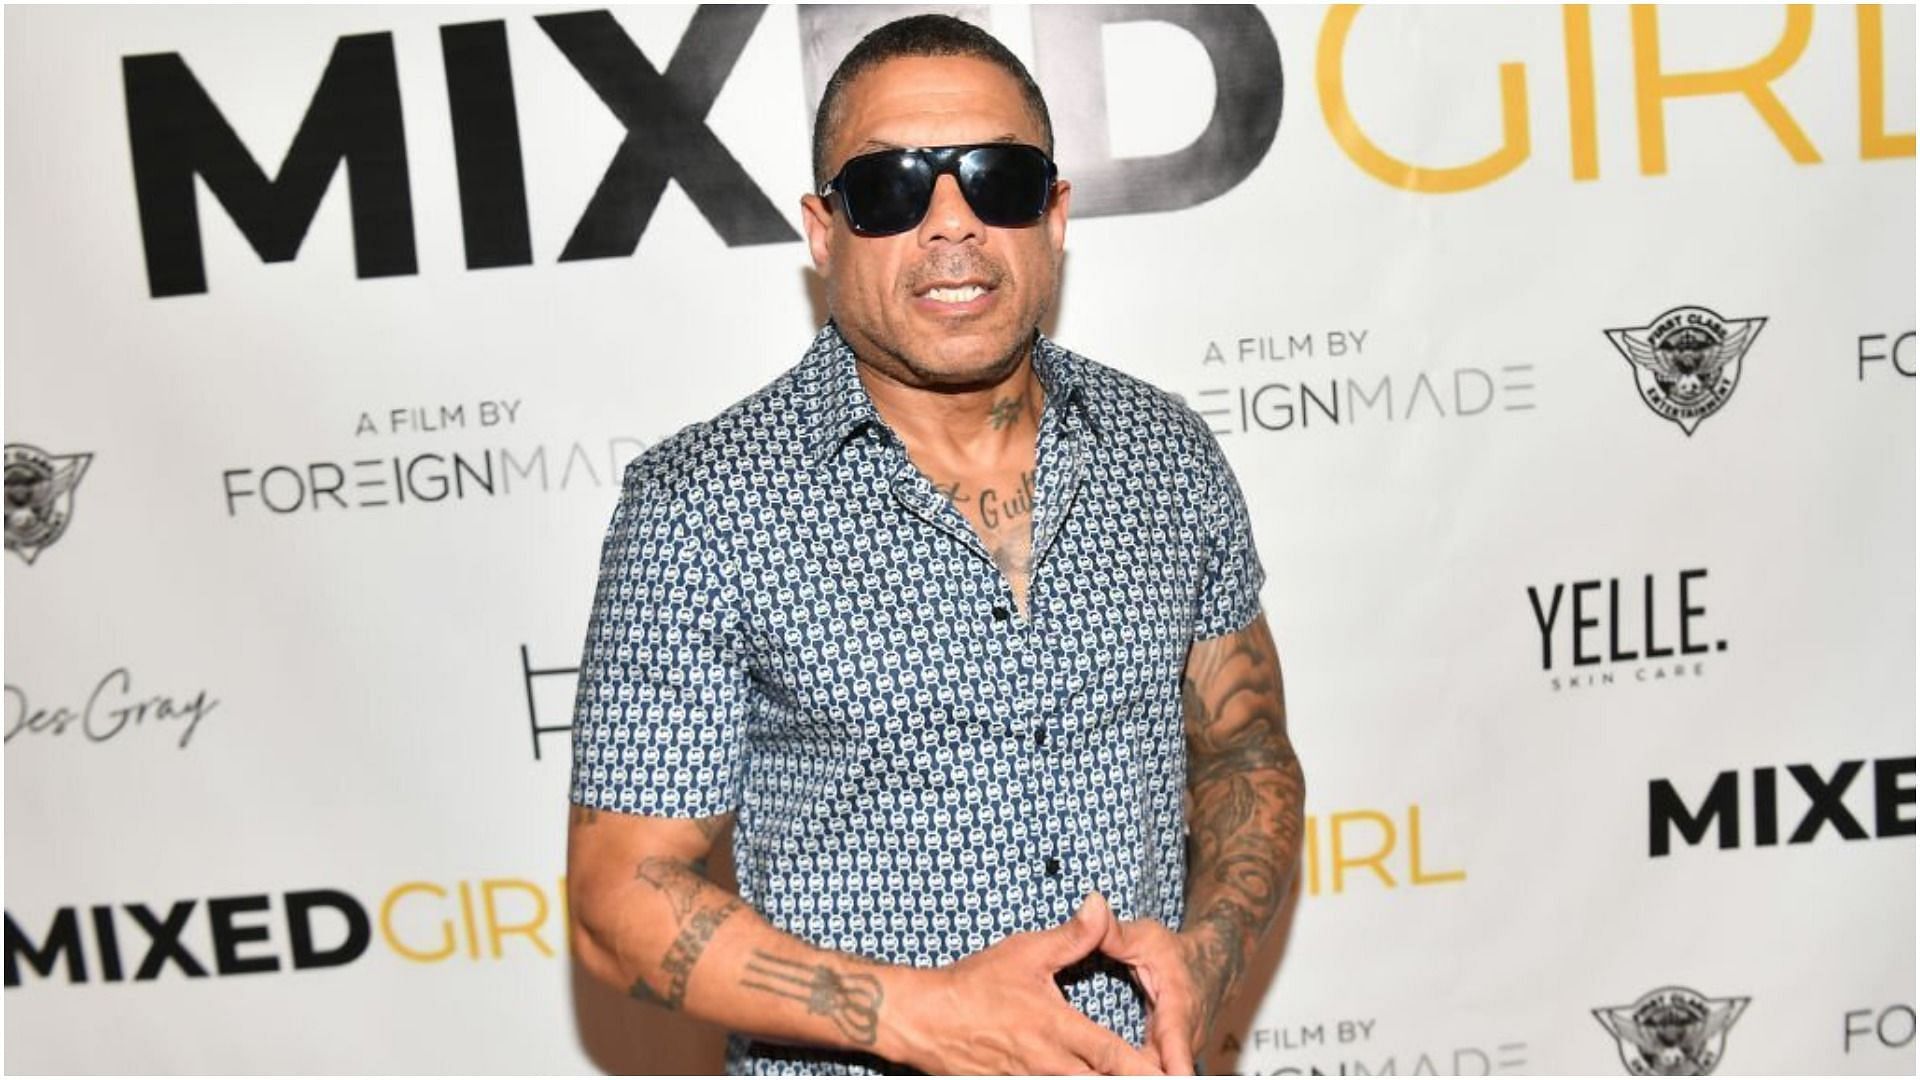 Benzino has surrendered himself following the arrest warrant issued against him (Image via Paras Griffin/Getty Images)